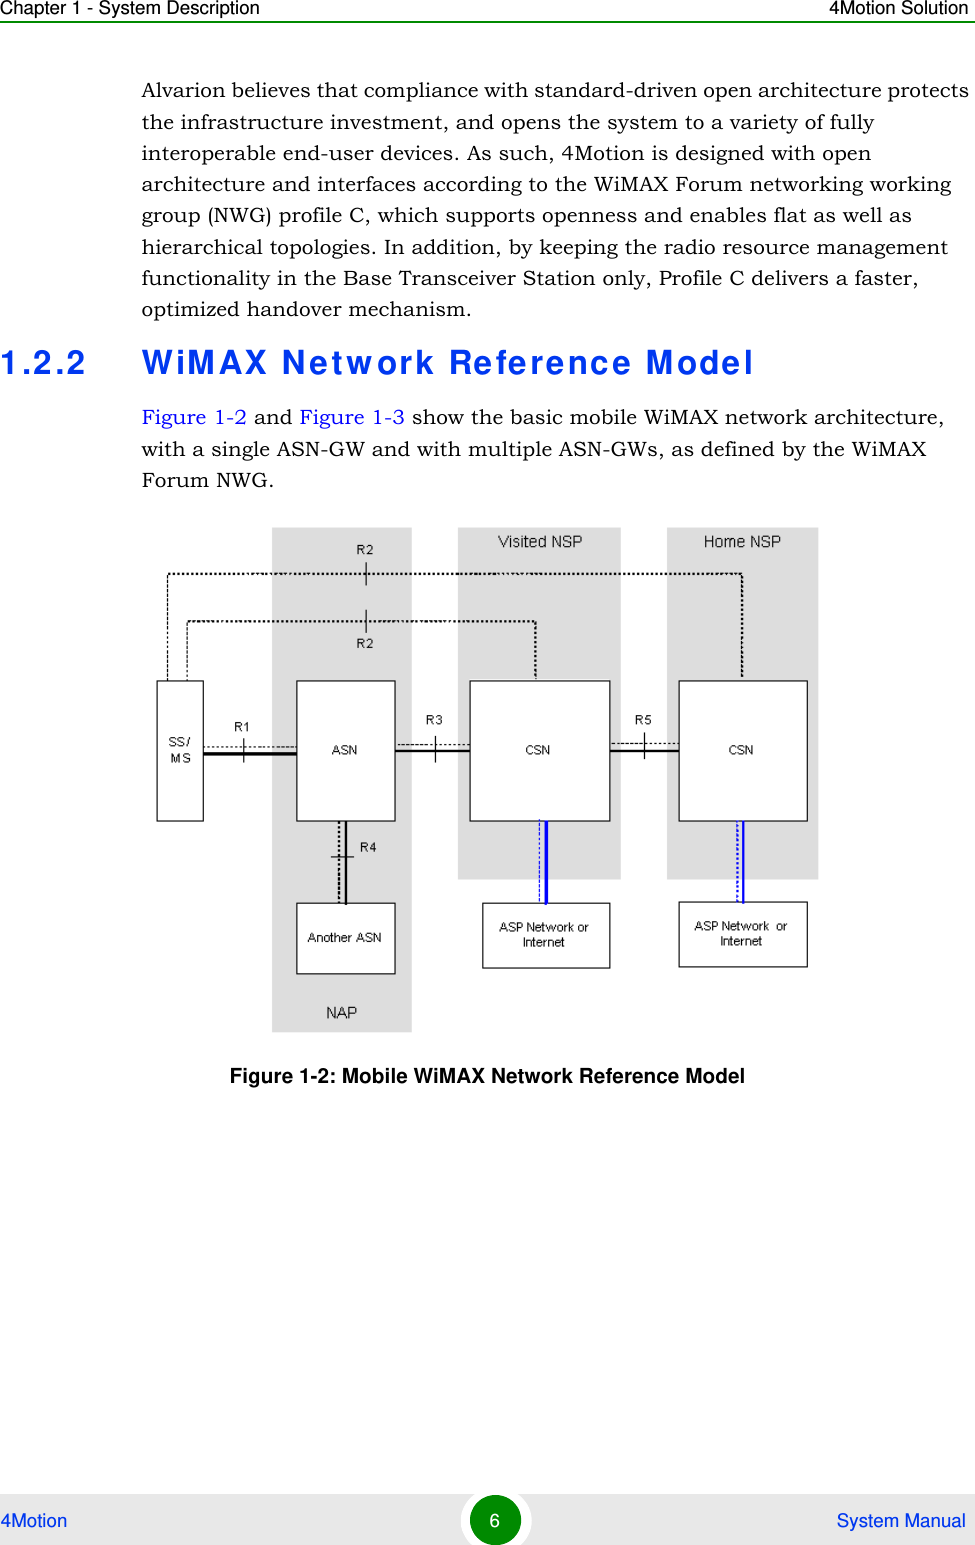 Chapter 1 - System Description 4Motion Solution4Motion 6 System ManualAlvarion believes that compliance with standard-driven open architecture protects the infrastructure investment, and opens the system to a variety of fully interoperable end-user devices. As such, 4Motion is designed with open architecture and interfaces according to the WiMAX Forum networking working group (NWG) profile C, which supports openness and enables flat as well as hierarchical topologies. In addition, by keeping the radio resource management functionality in the Base Transceiver Station only, Profile C delivers a faster, optimized handover mechanism.1.2.2 WiMAX  Net w ork Reference M odelFigure 1-2 and Figure 1-3 show the basic mobile WiMAX network architecture, with a single ASN-GW and with multiple ASN-GWs, as defined by the WiMAX Forum NWG.Figure 1-2: Mobile WiMAX Network Reference Model